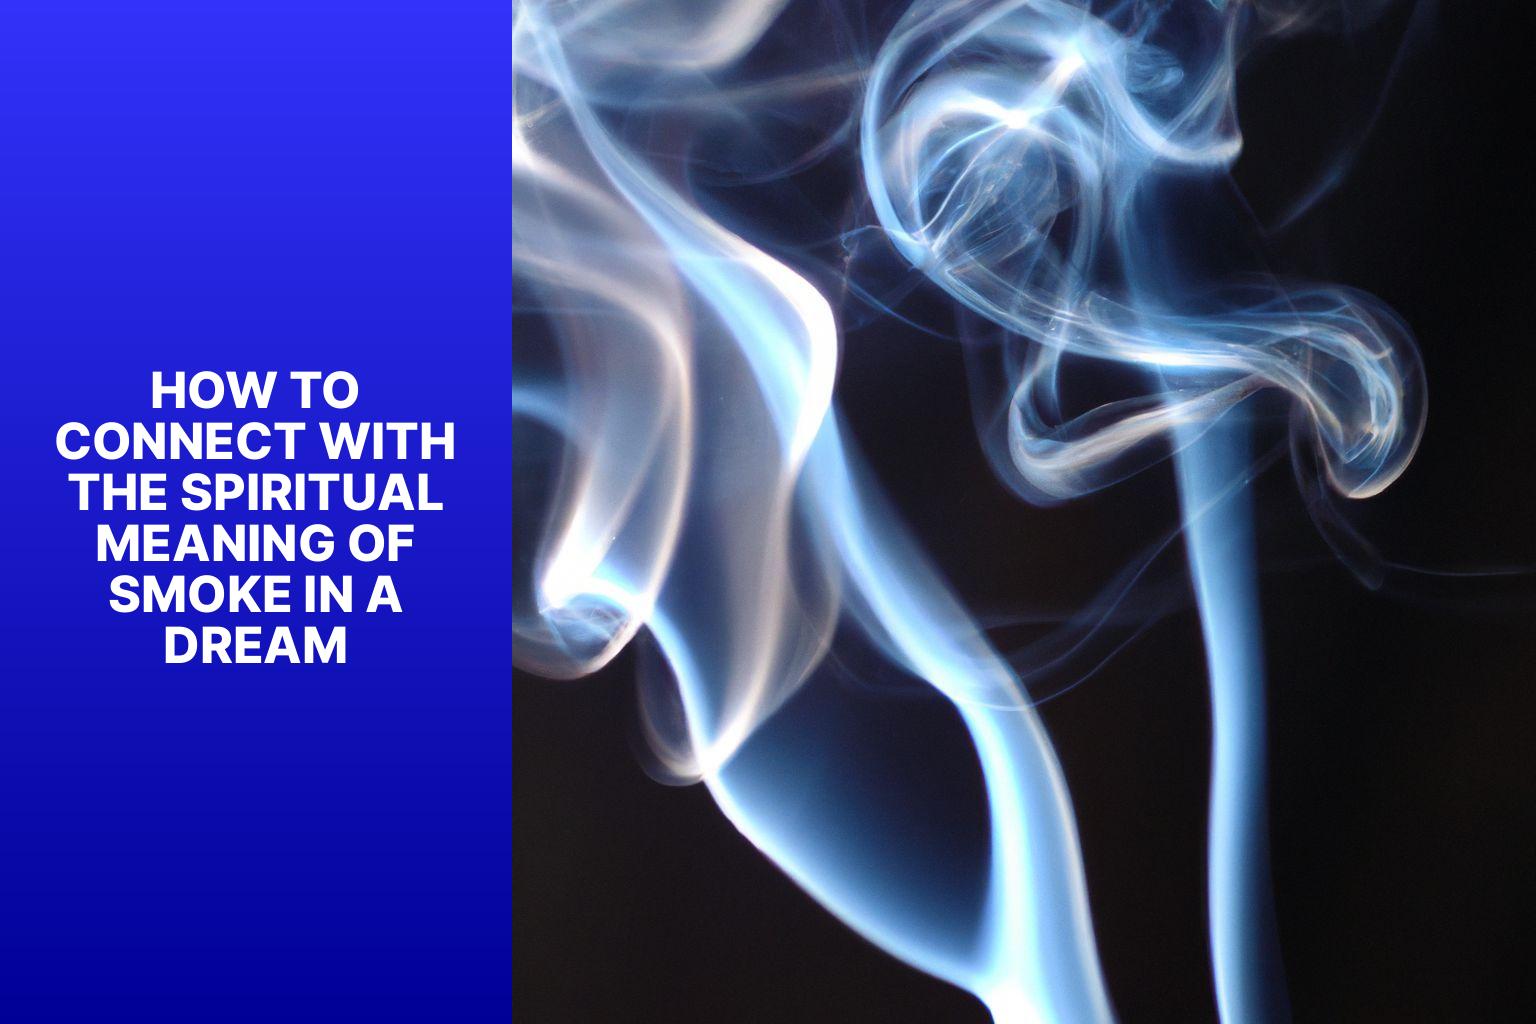 How to Connect with the Spiritual Meaning of Smoke in a Dream - spiritual meaning of smoke in a dream 